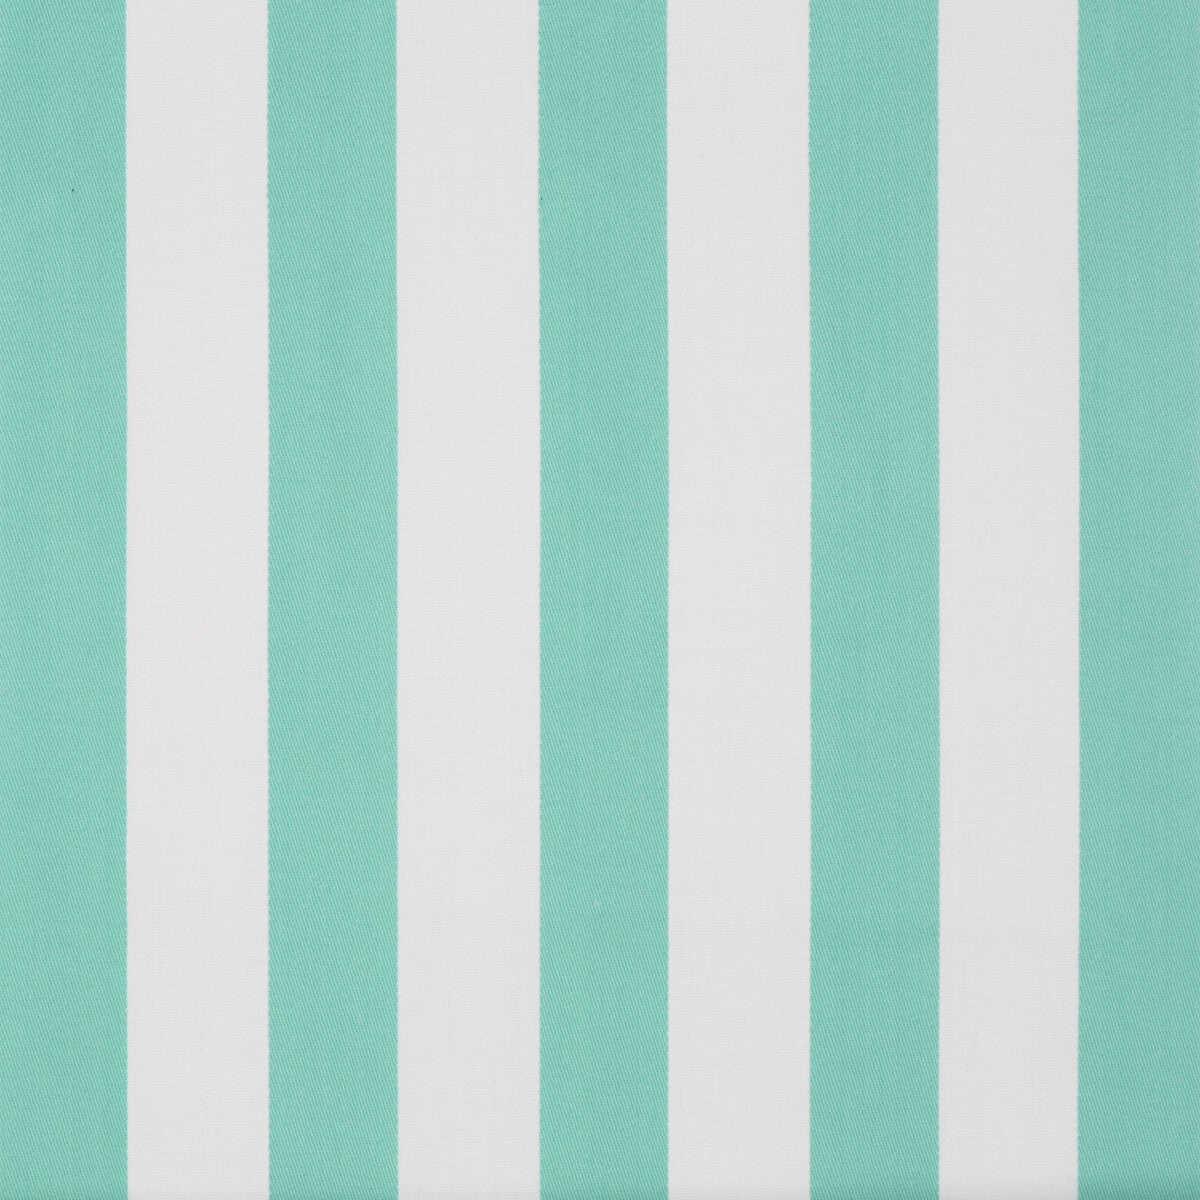 Surf Stripe fabric in shorely blue color - pattern 2016117.113.0 - by Lee Jofa in the Lilly Pulitzer II collection